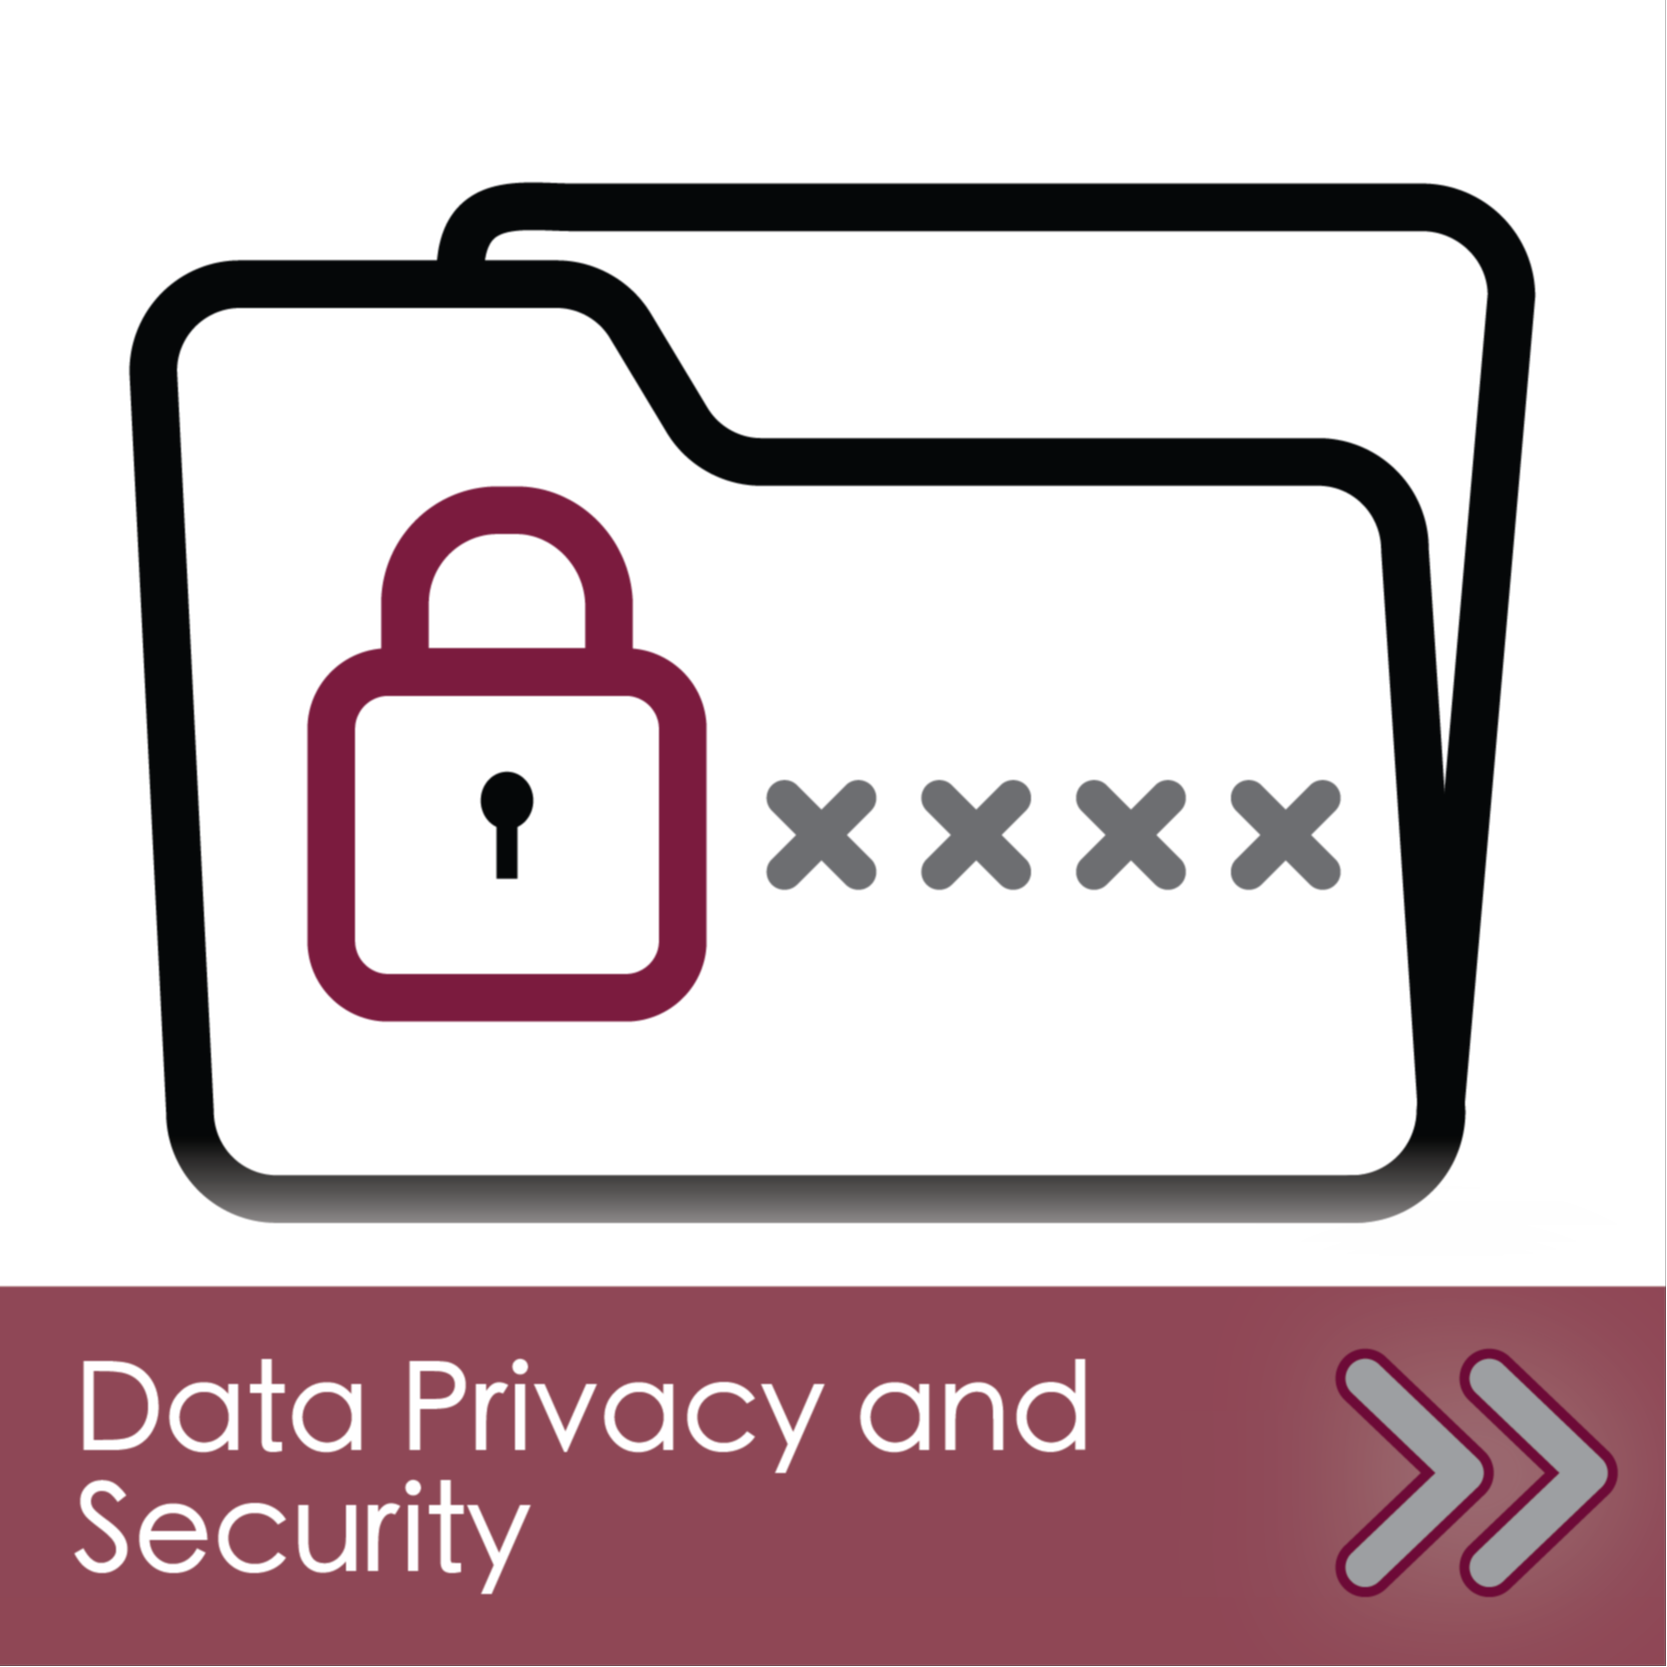 DCMO BOCES Privacy and Security Navigation Link